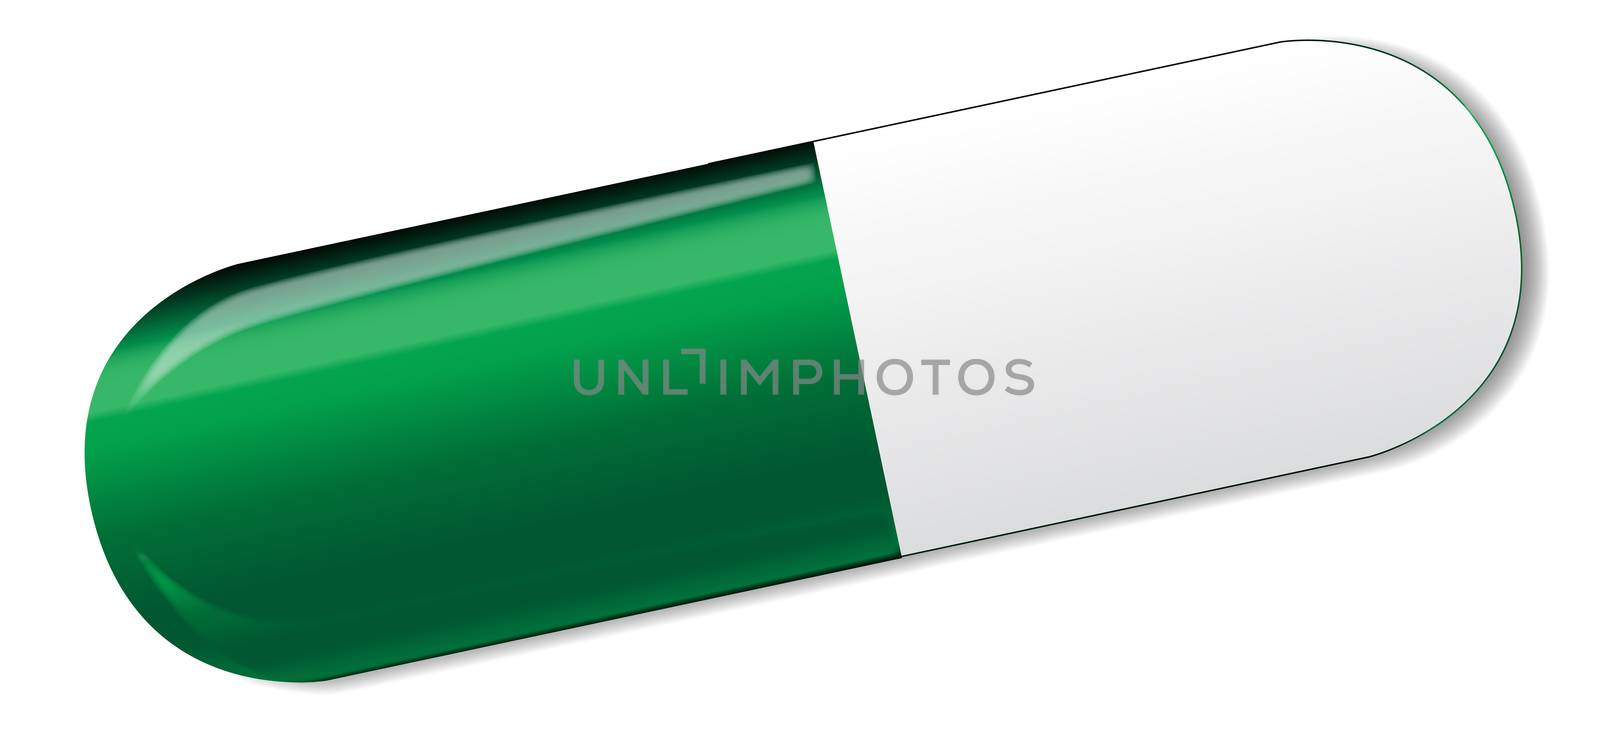 A green and white medicine capsule isolated on a white background.